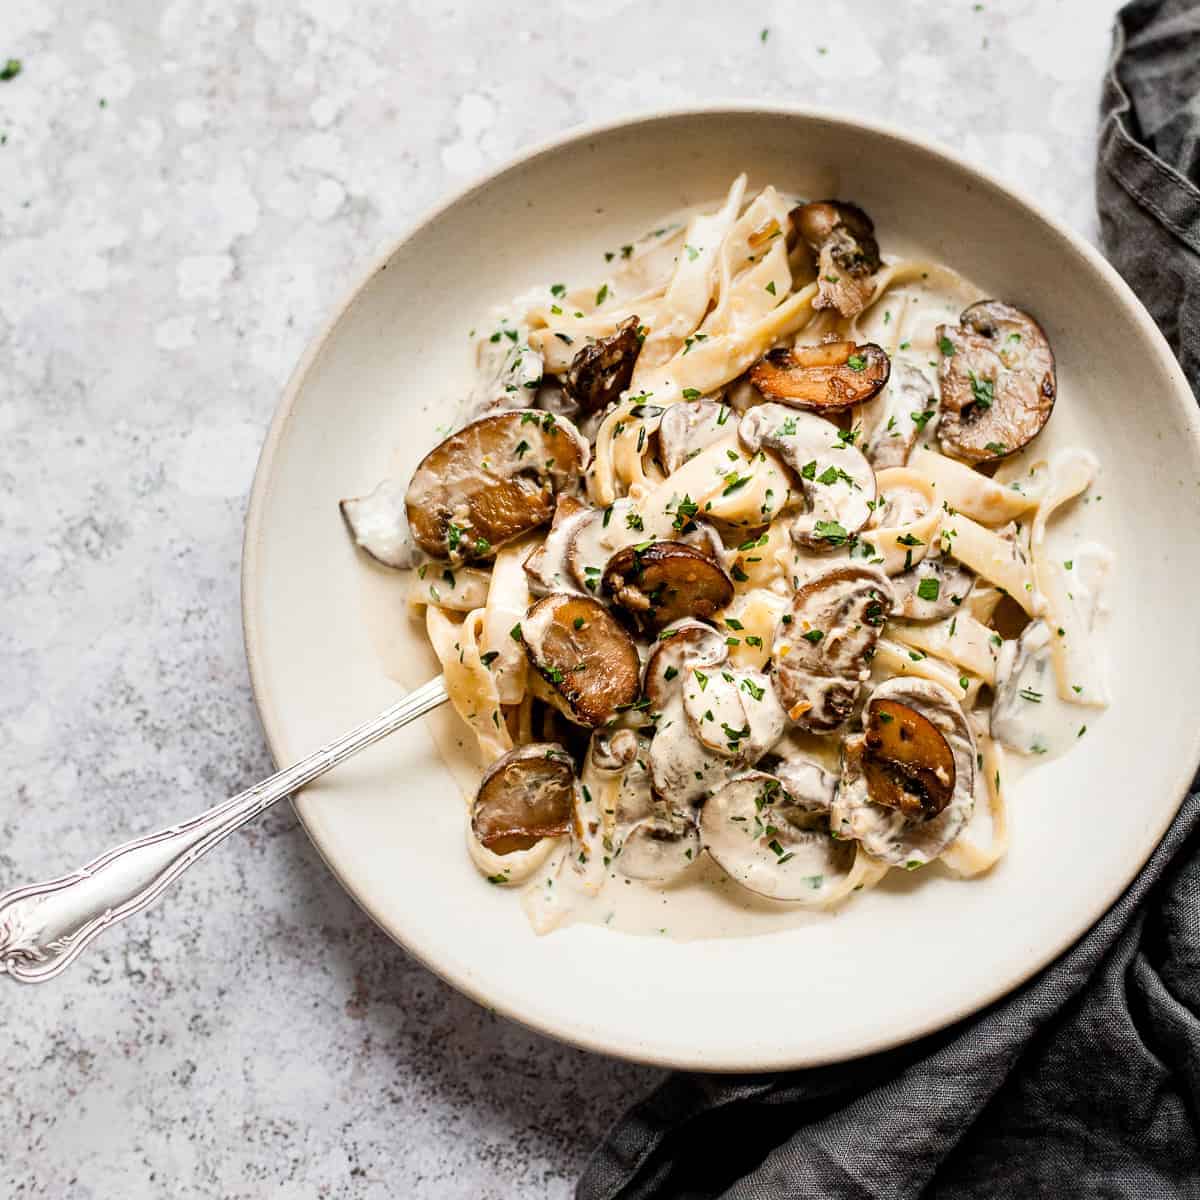 Mushroom pasta with herbs and parmesan.